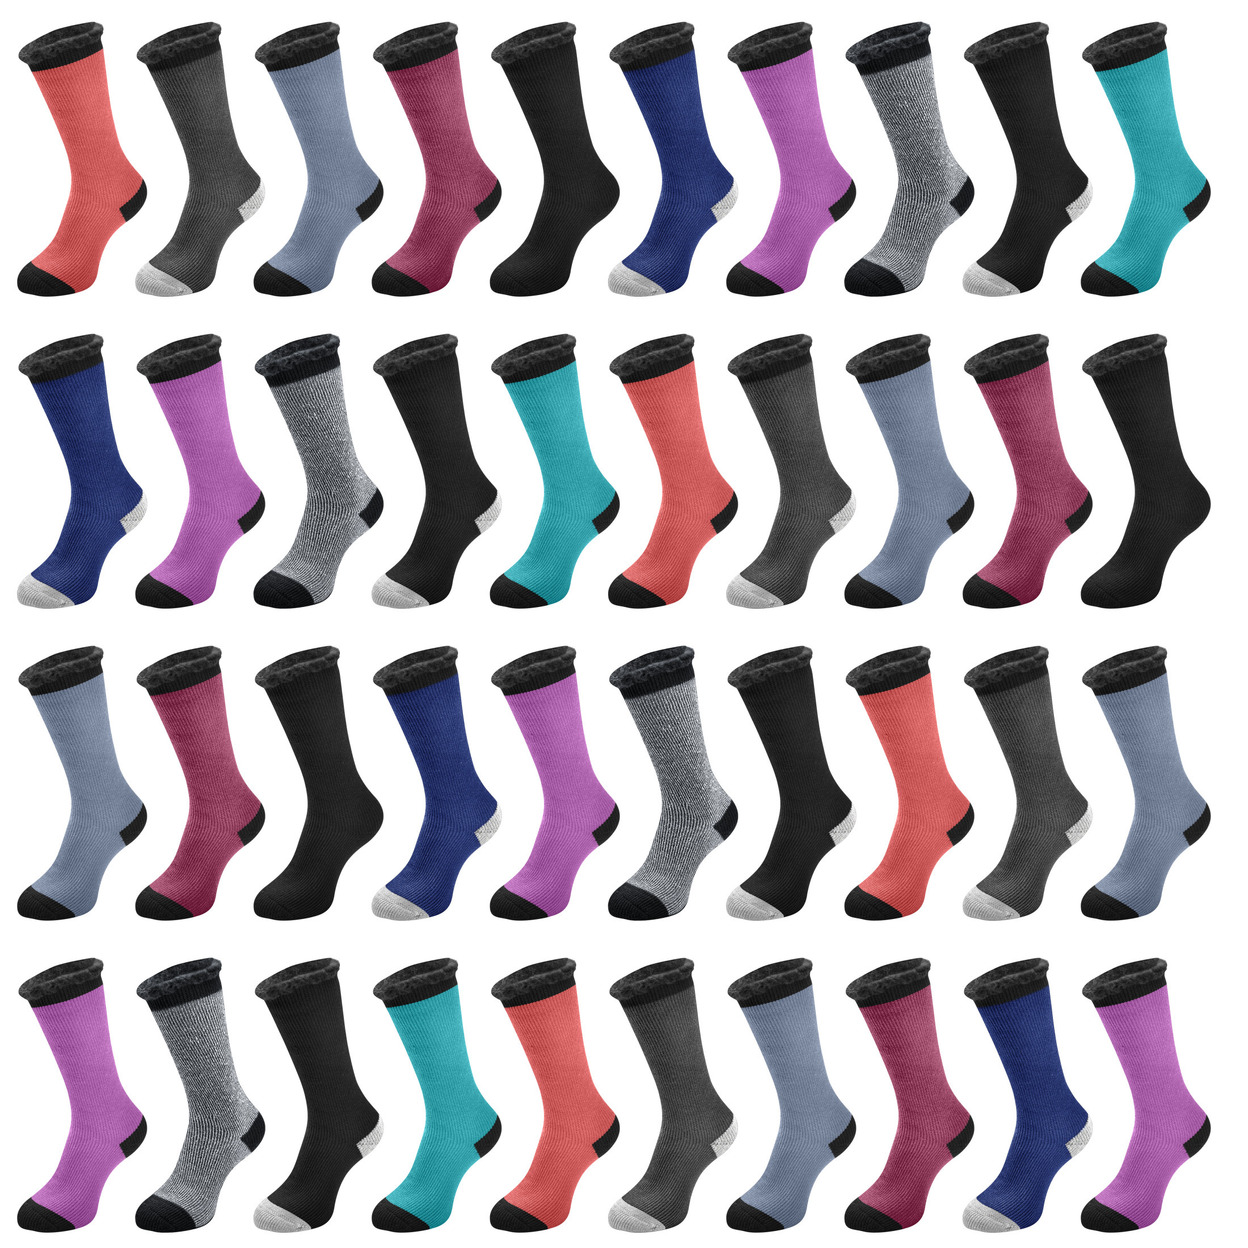 Multi-Pairs: Men's Thermal-Insulated Brushed Lined Warm Heated Winter Socks For Cold Weather - 1-pairs